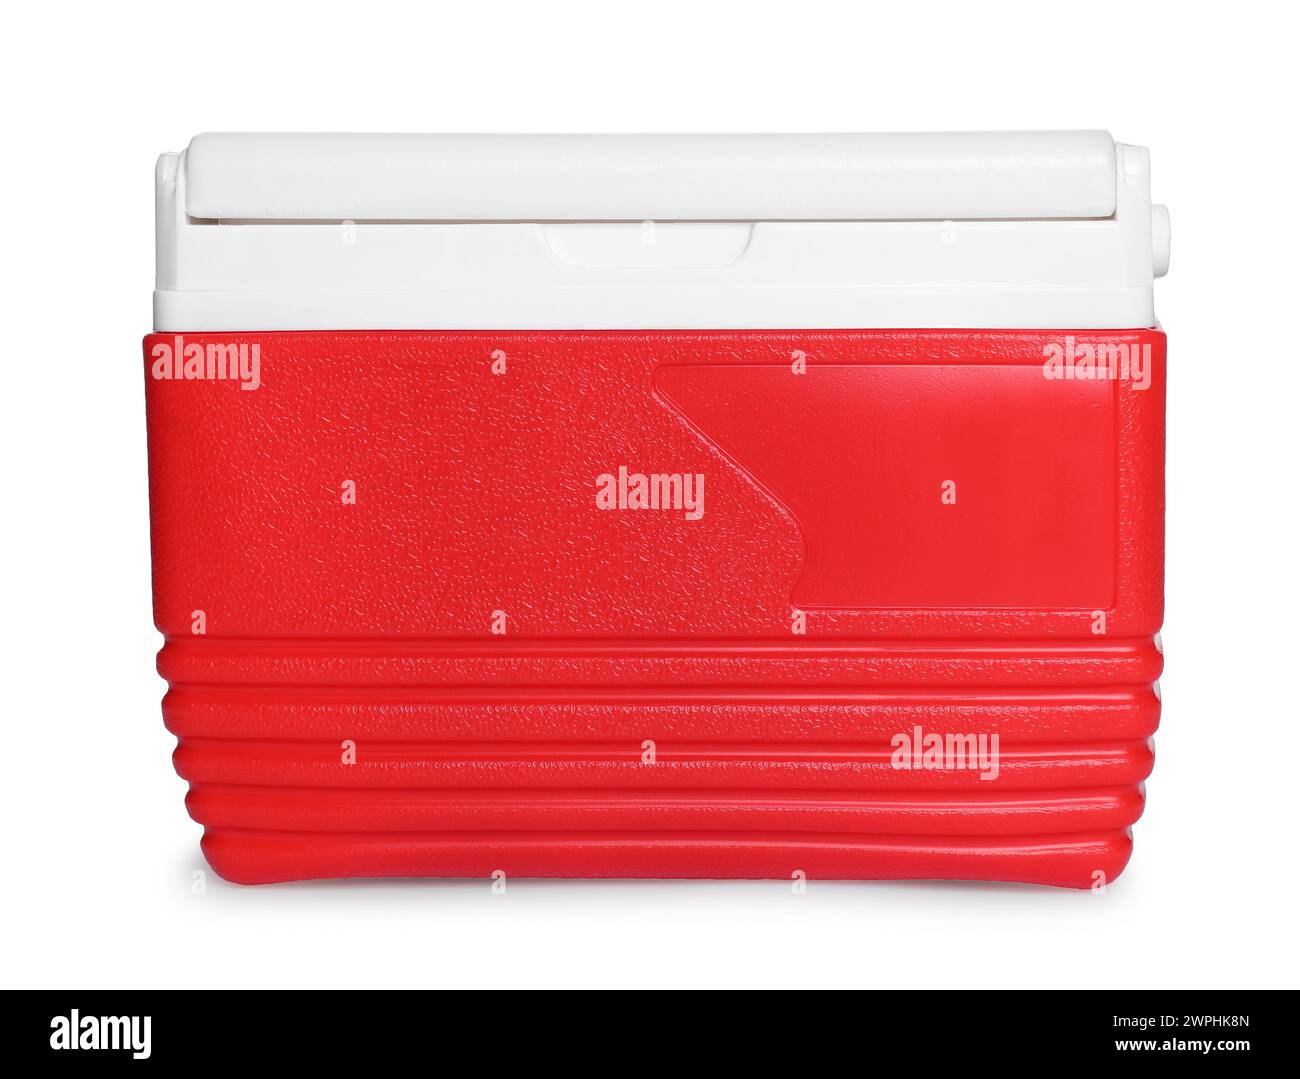 Red plastic cool box isolated on white Stock Photo